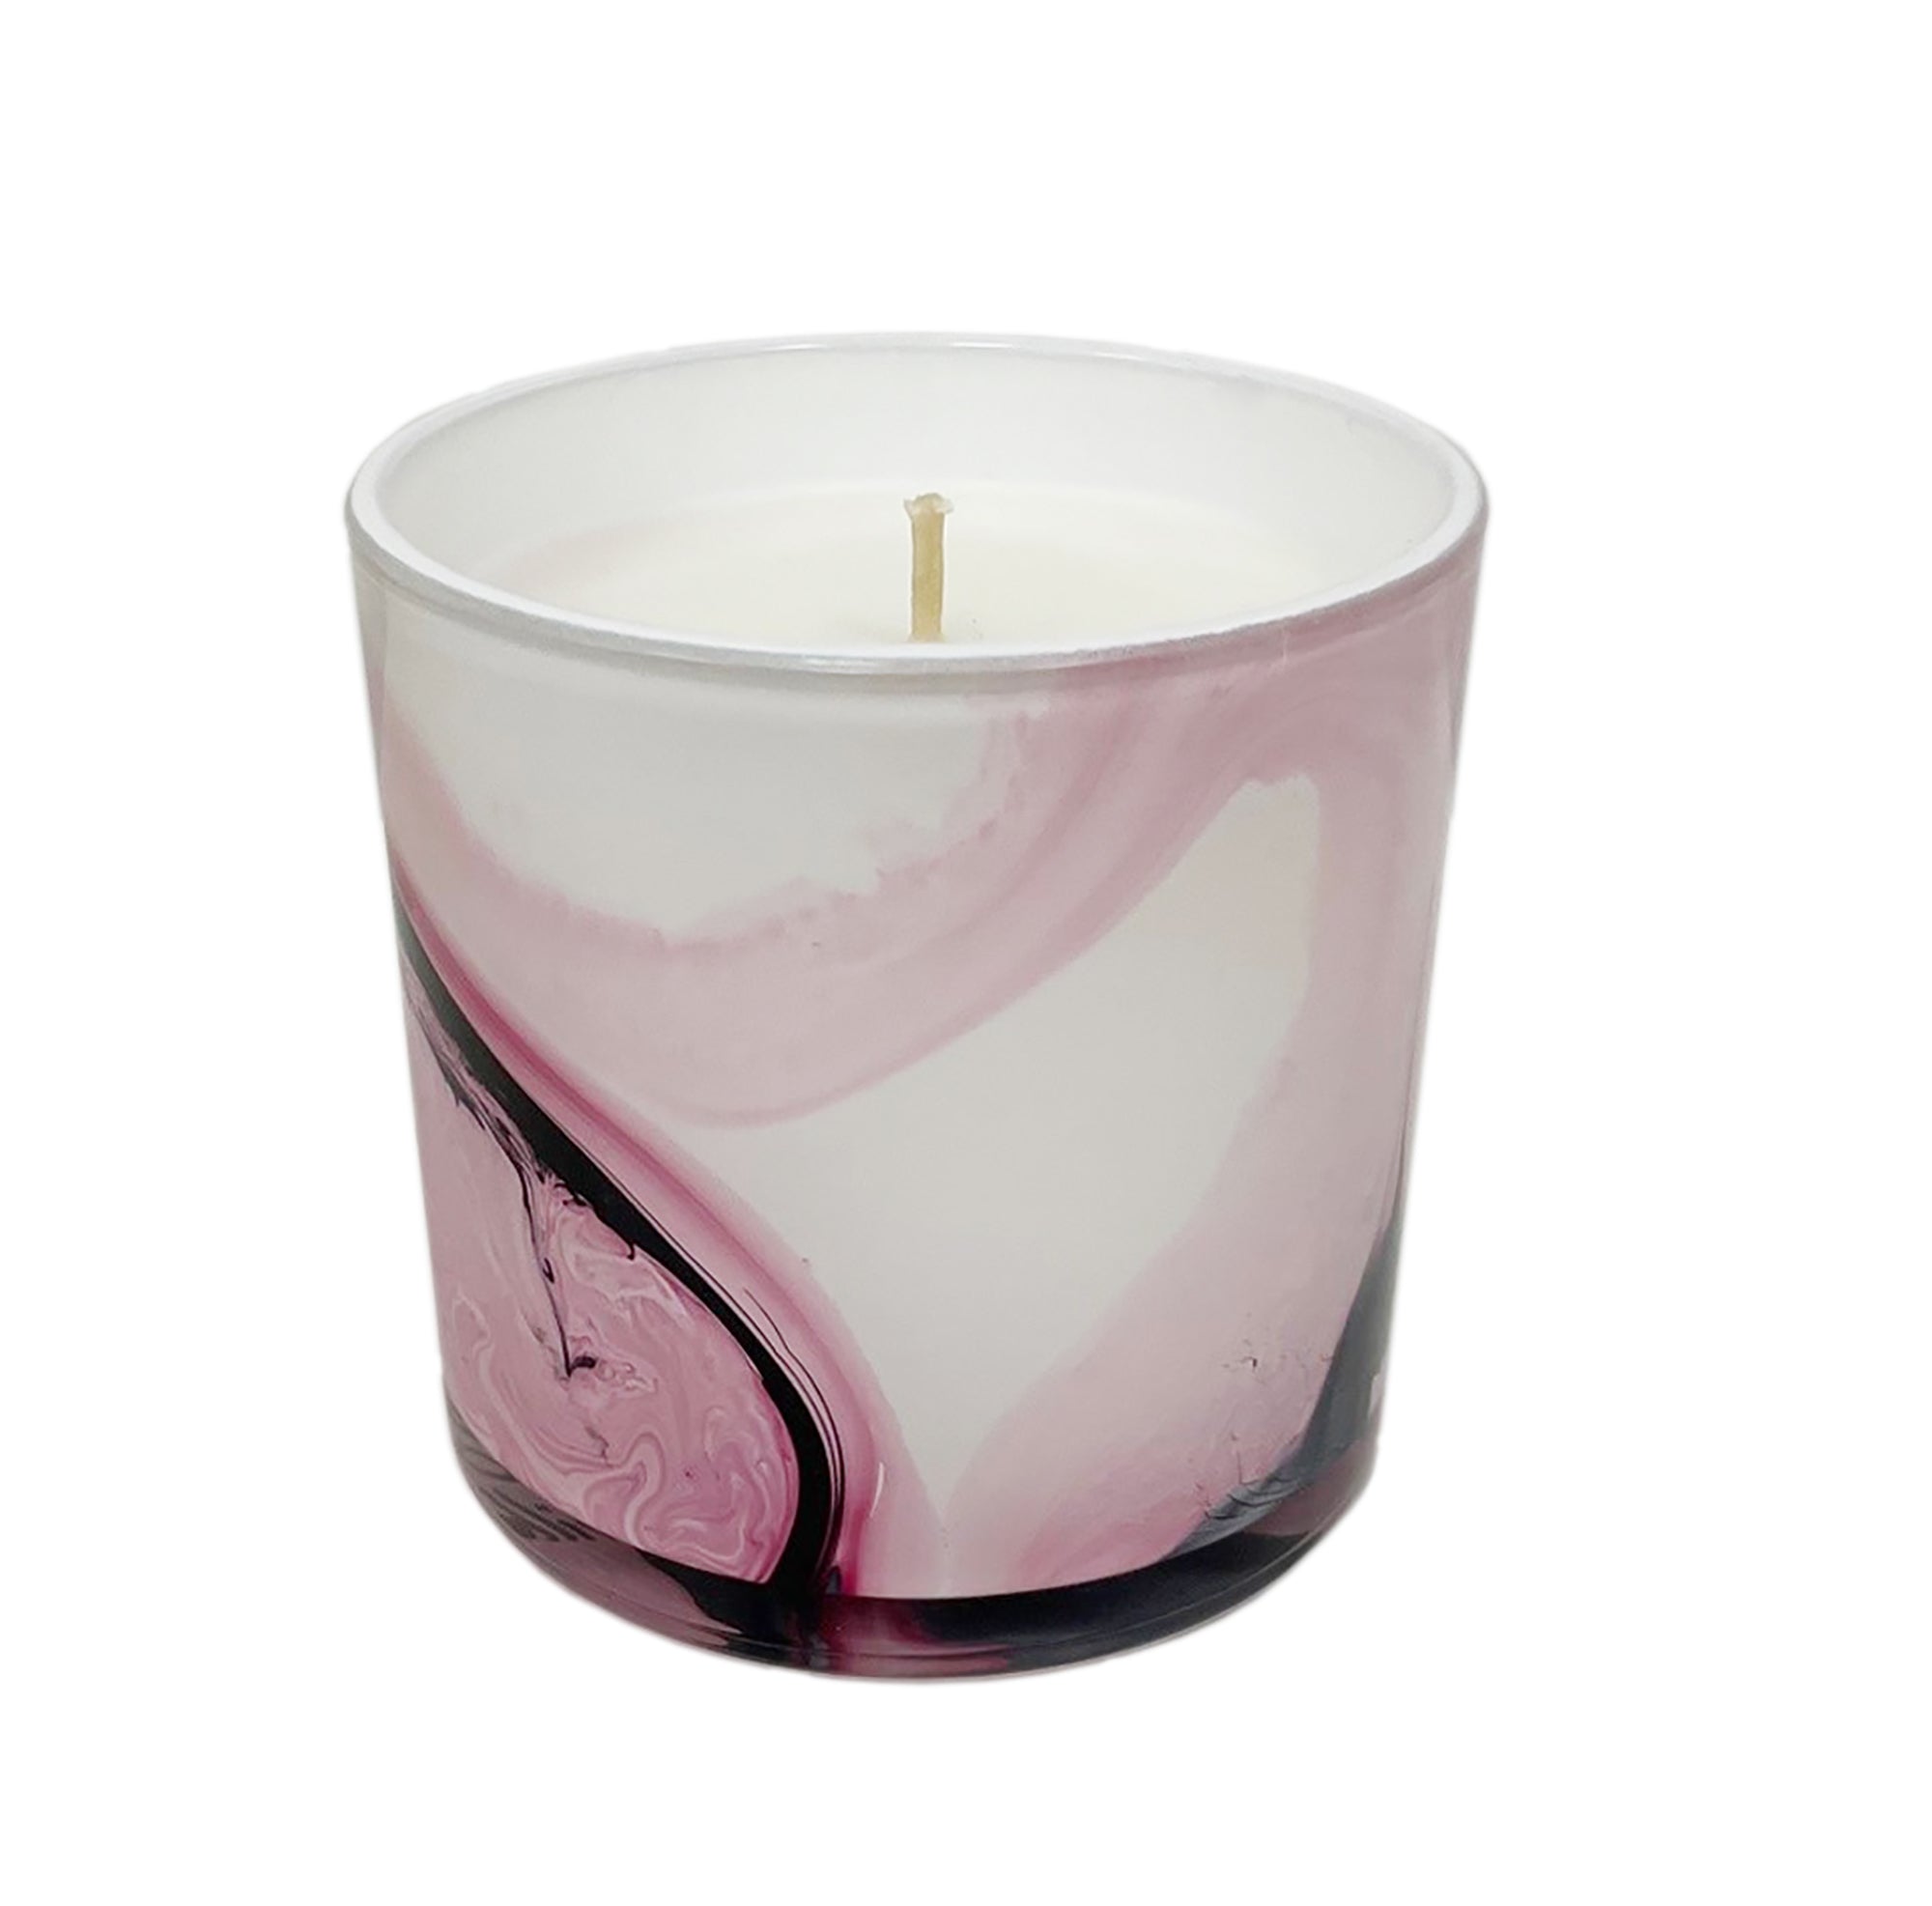 Vanilla & Red Currant 14 oz. Swirl Glass Candle